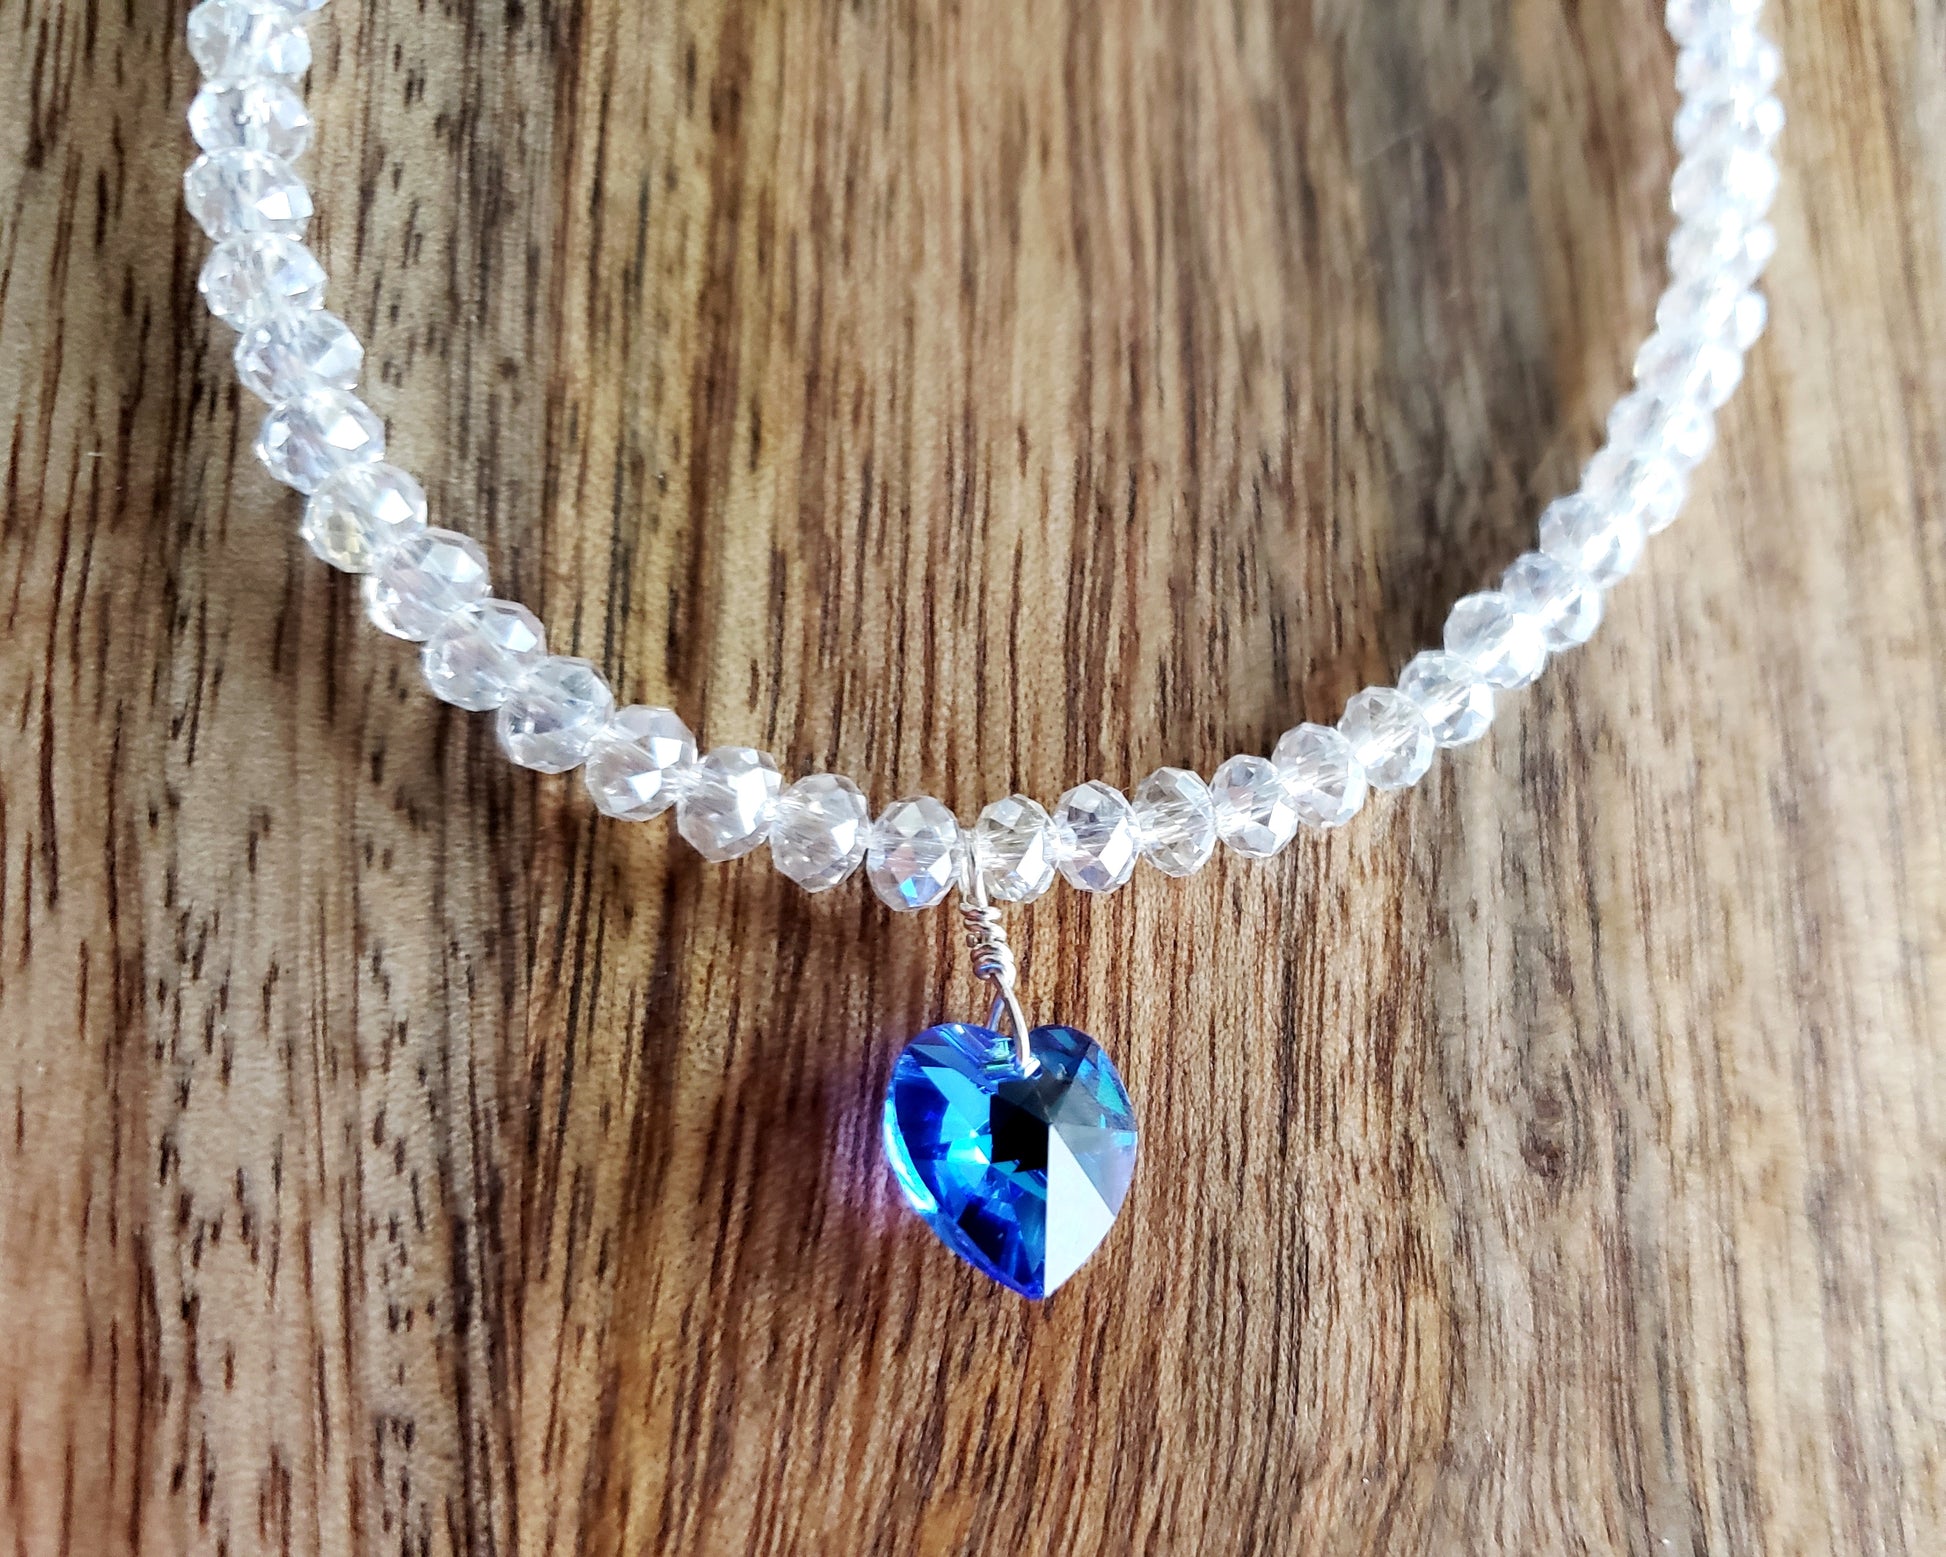 Something Blue Crystal Heart Beaded Ankle Bracelet, a Blue Crystal Heart dangling from clear Ab crystal beads, finished with Sterling Silver